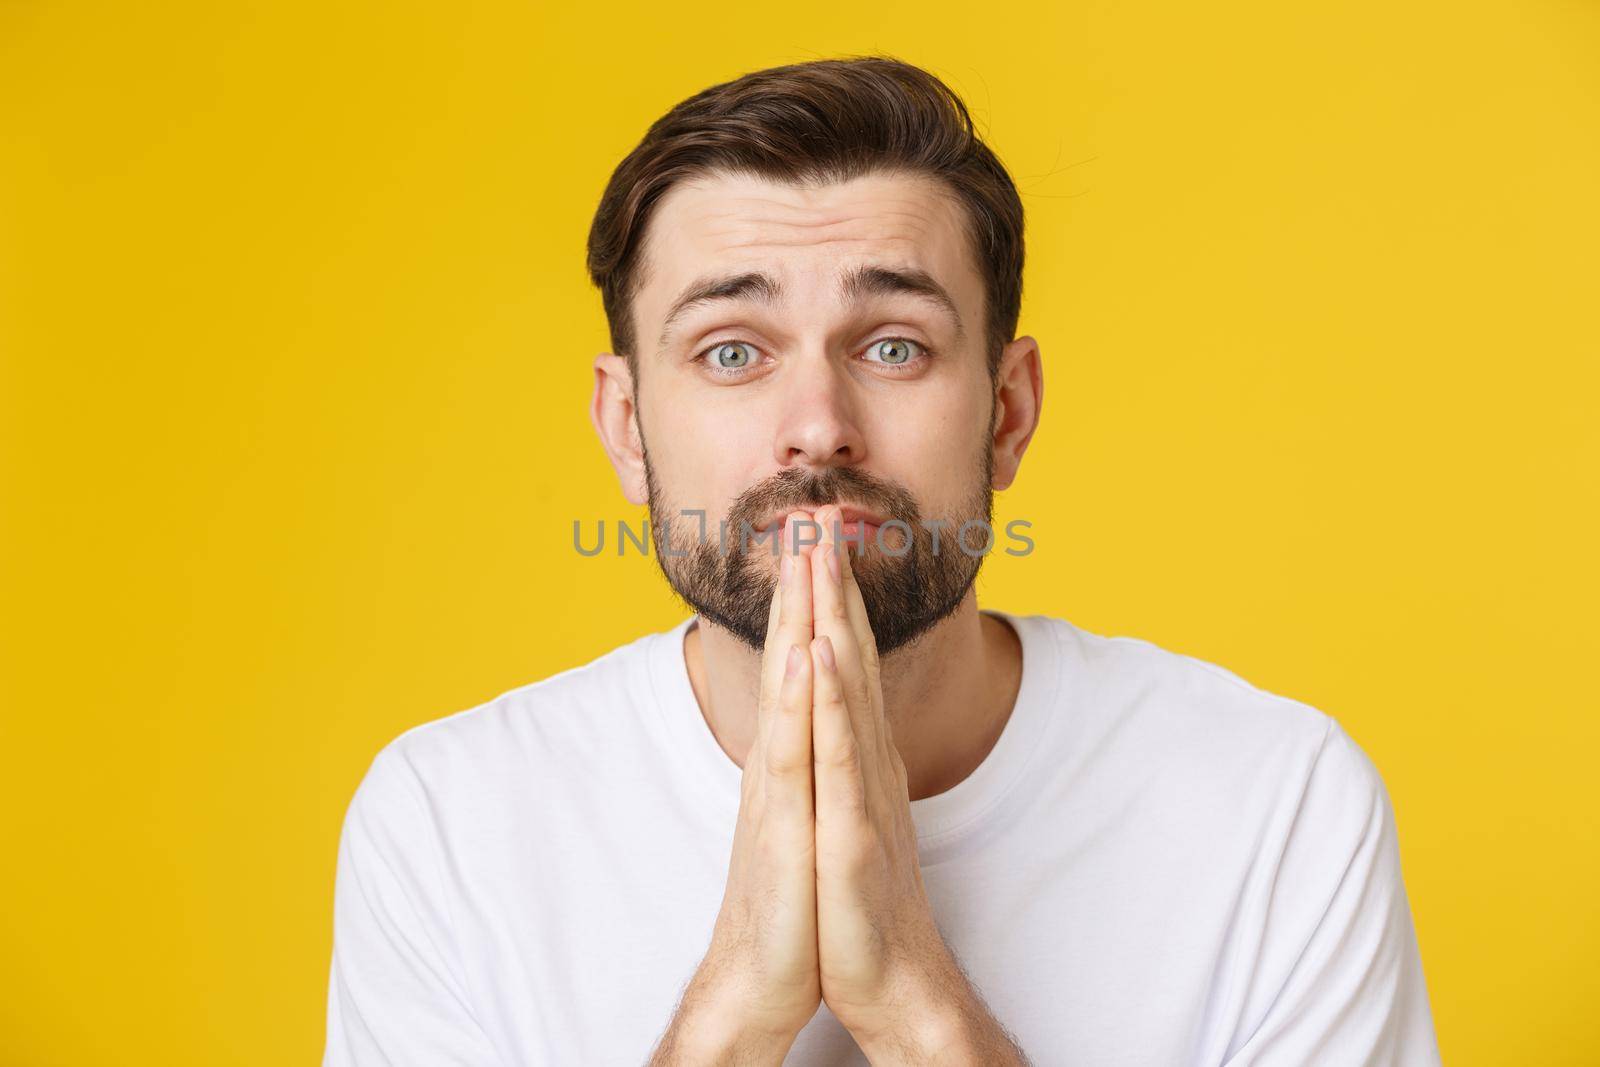 Young guy dressed casually isolated on yellow background, having put hands together in prayer or meditation, looking relaxed and calm